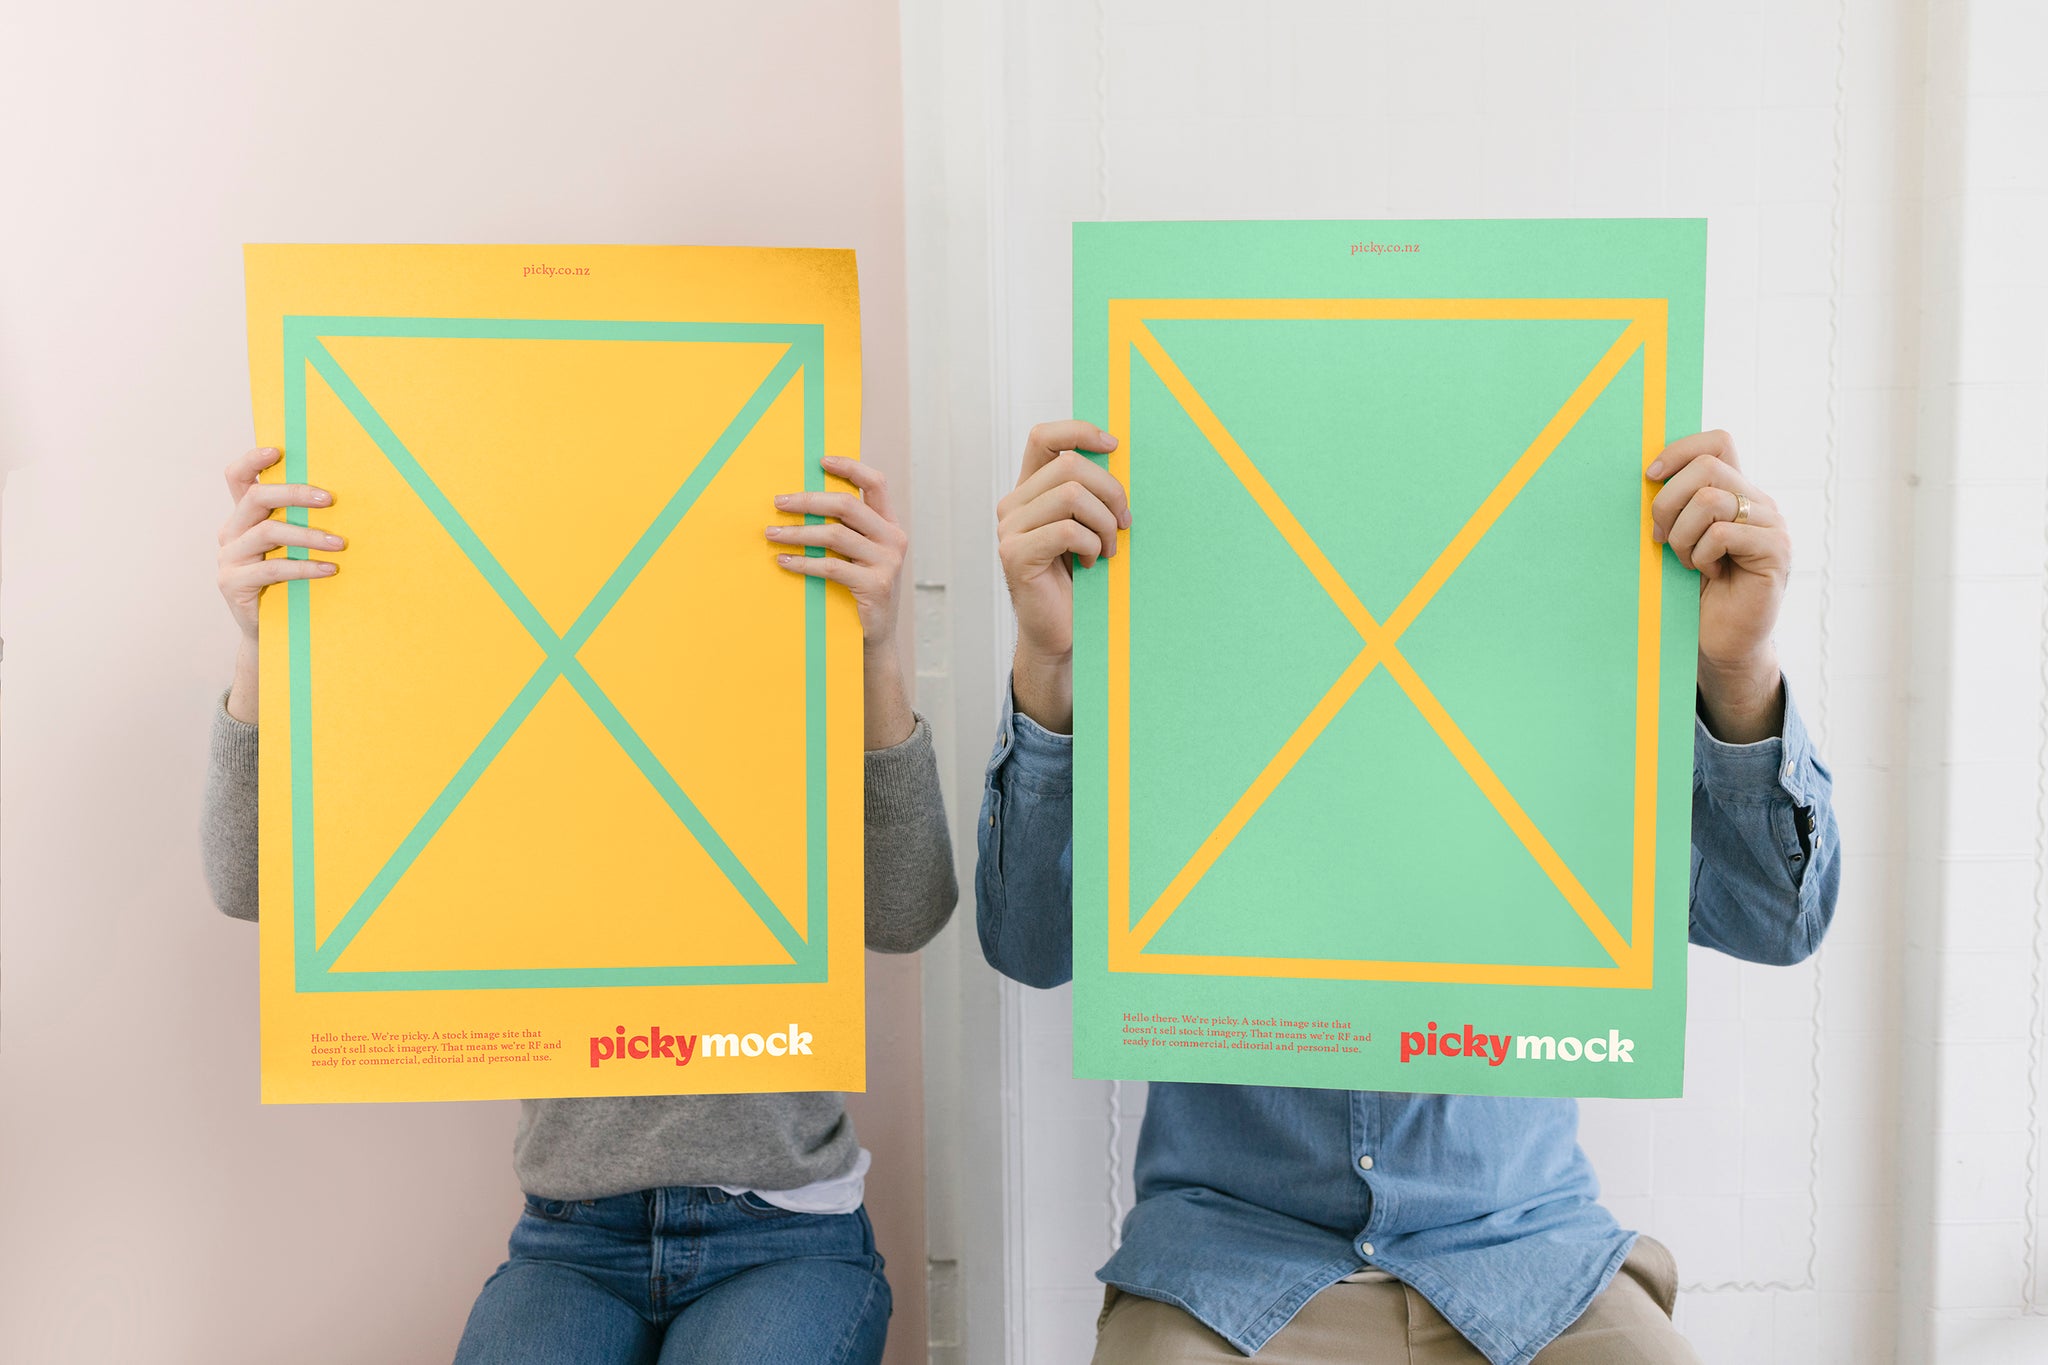 Landscape of two people obscured by holding up mock advertisements in green and yellow featuring small red picky logo.